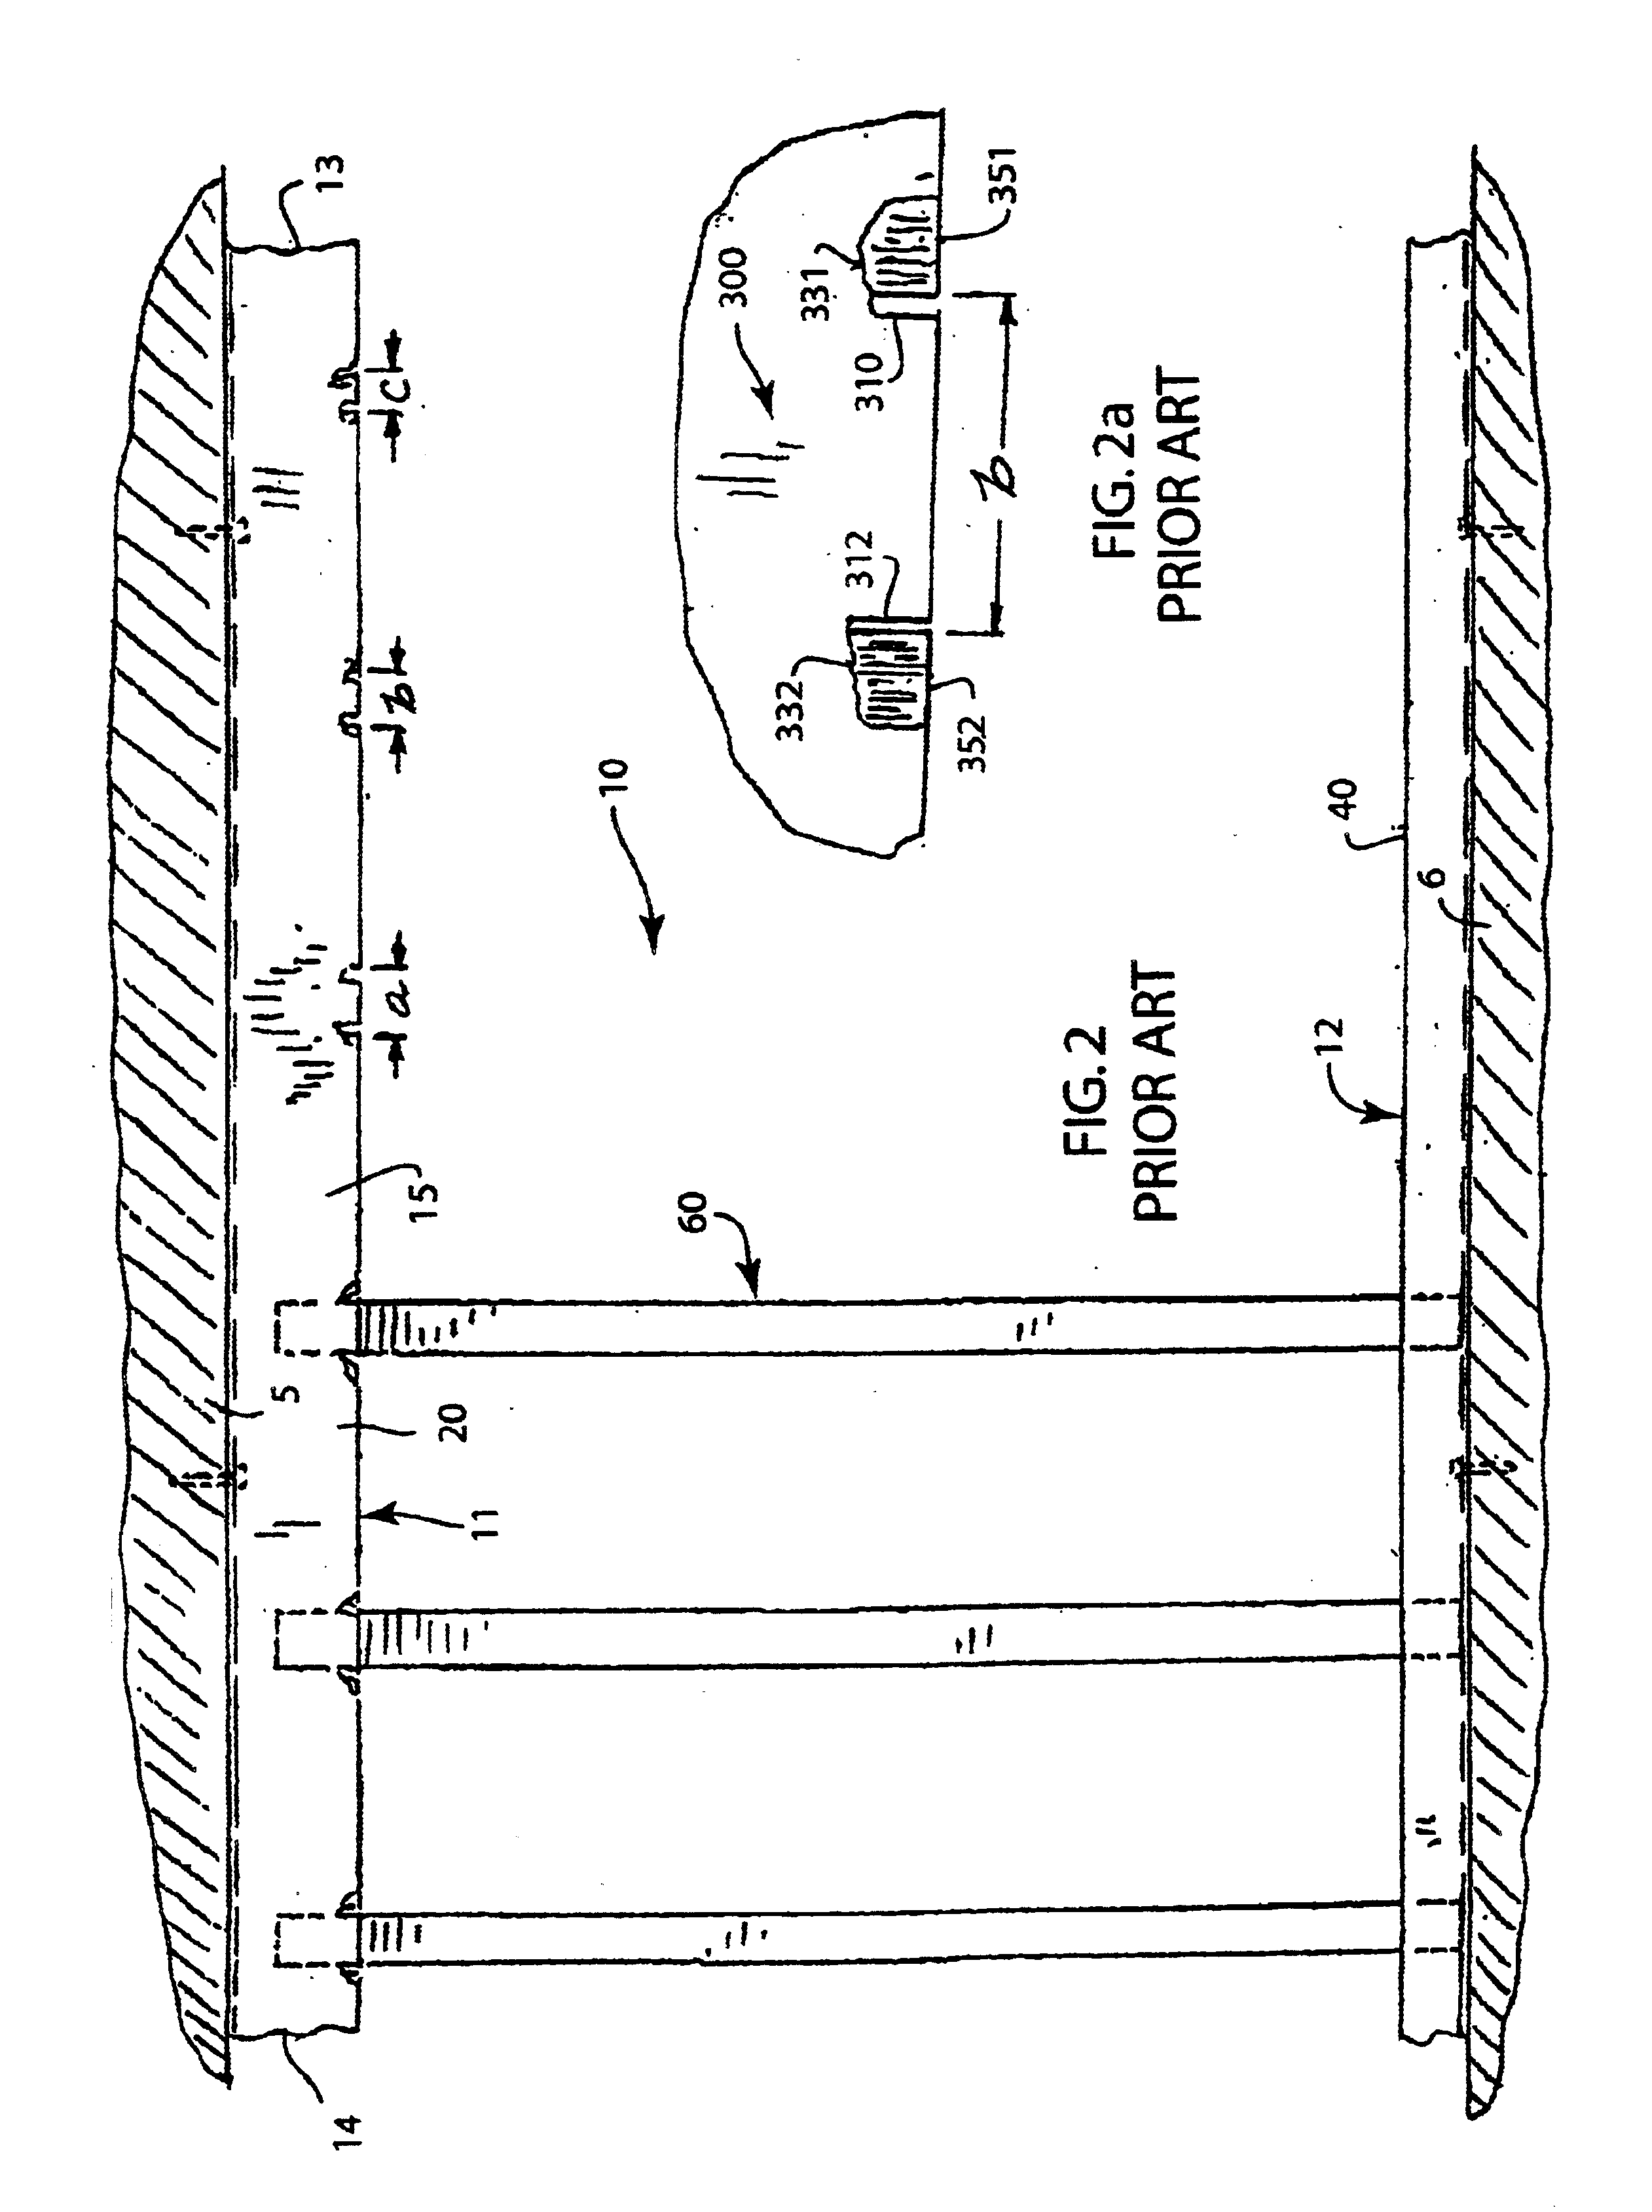 Tool for shaping a workpiece